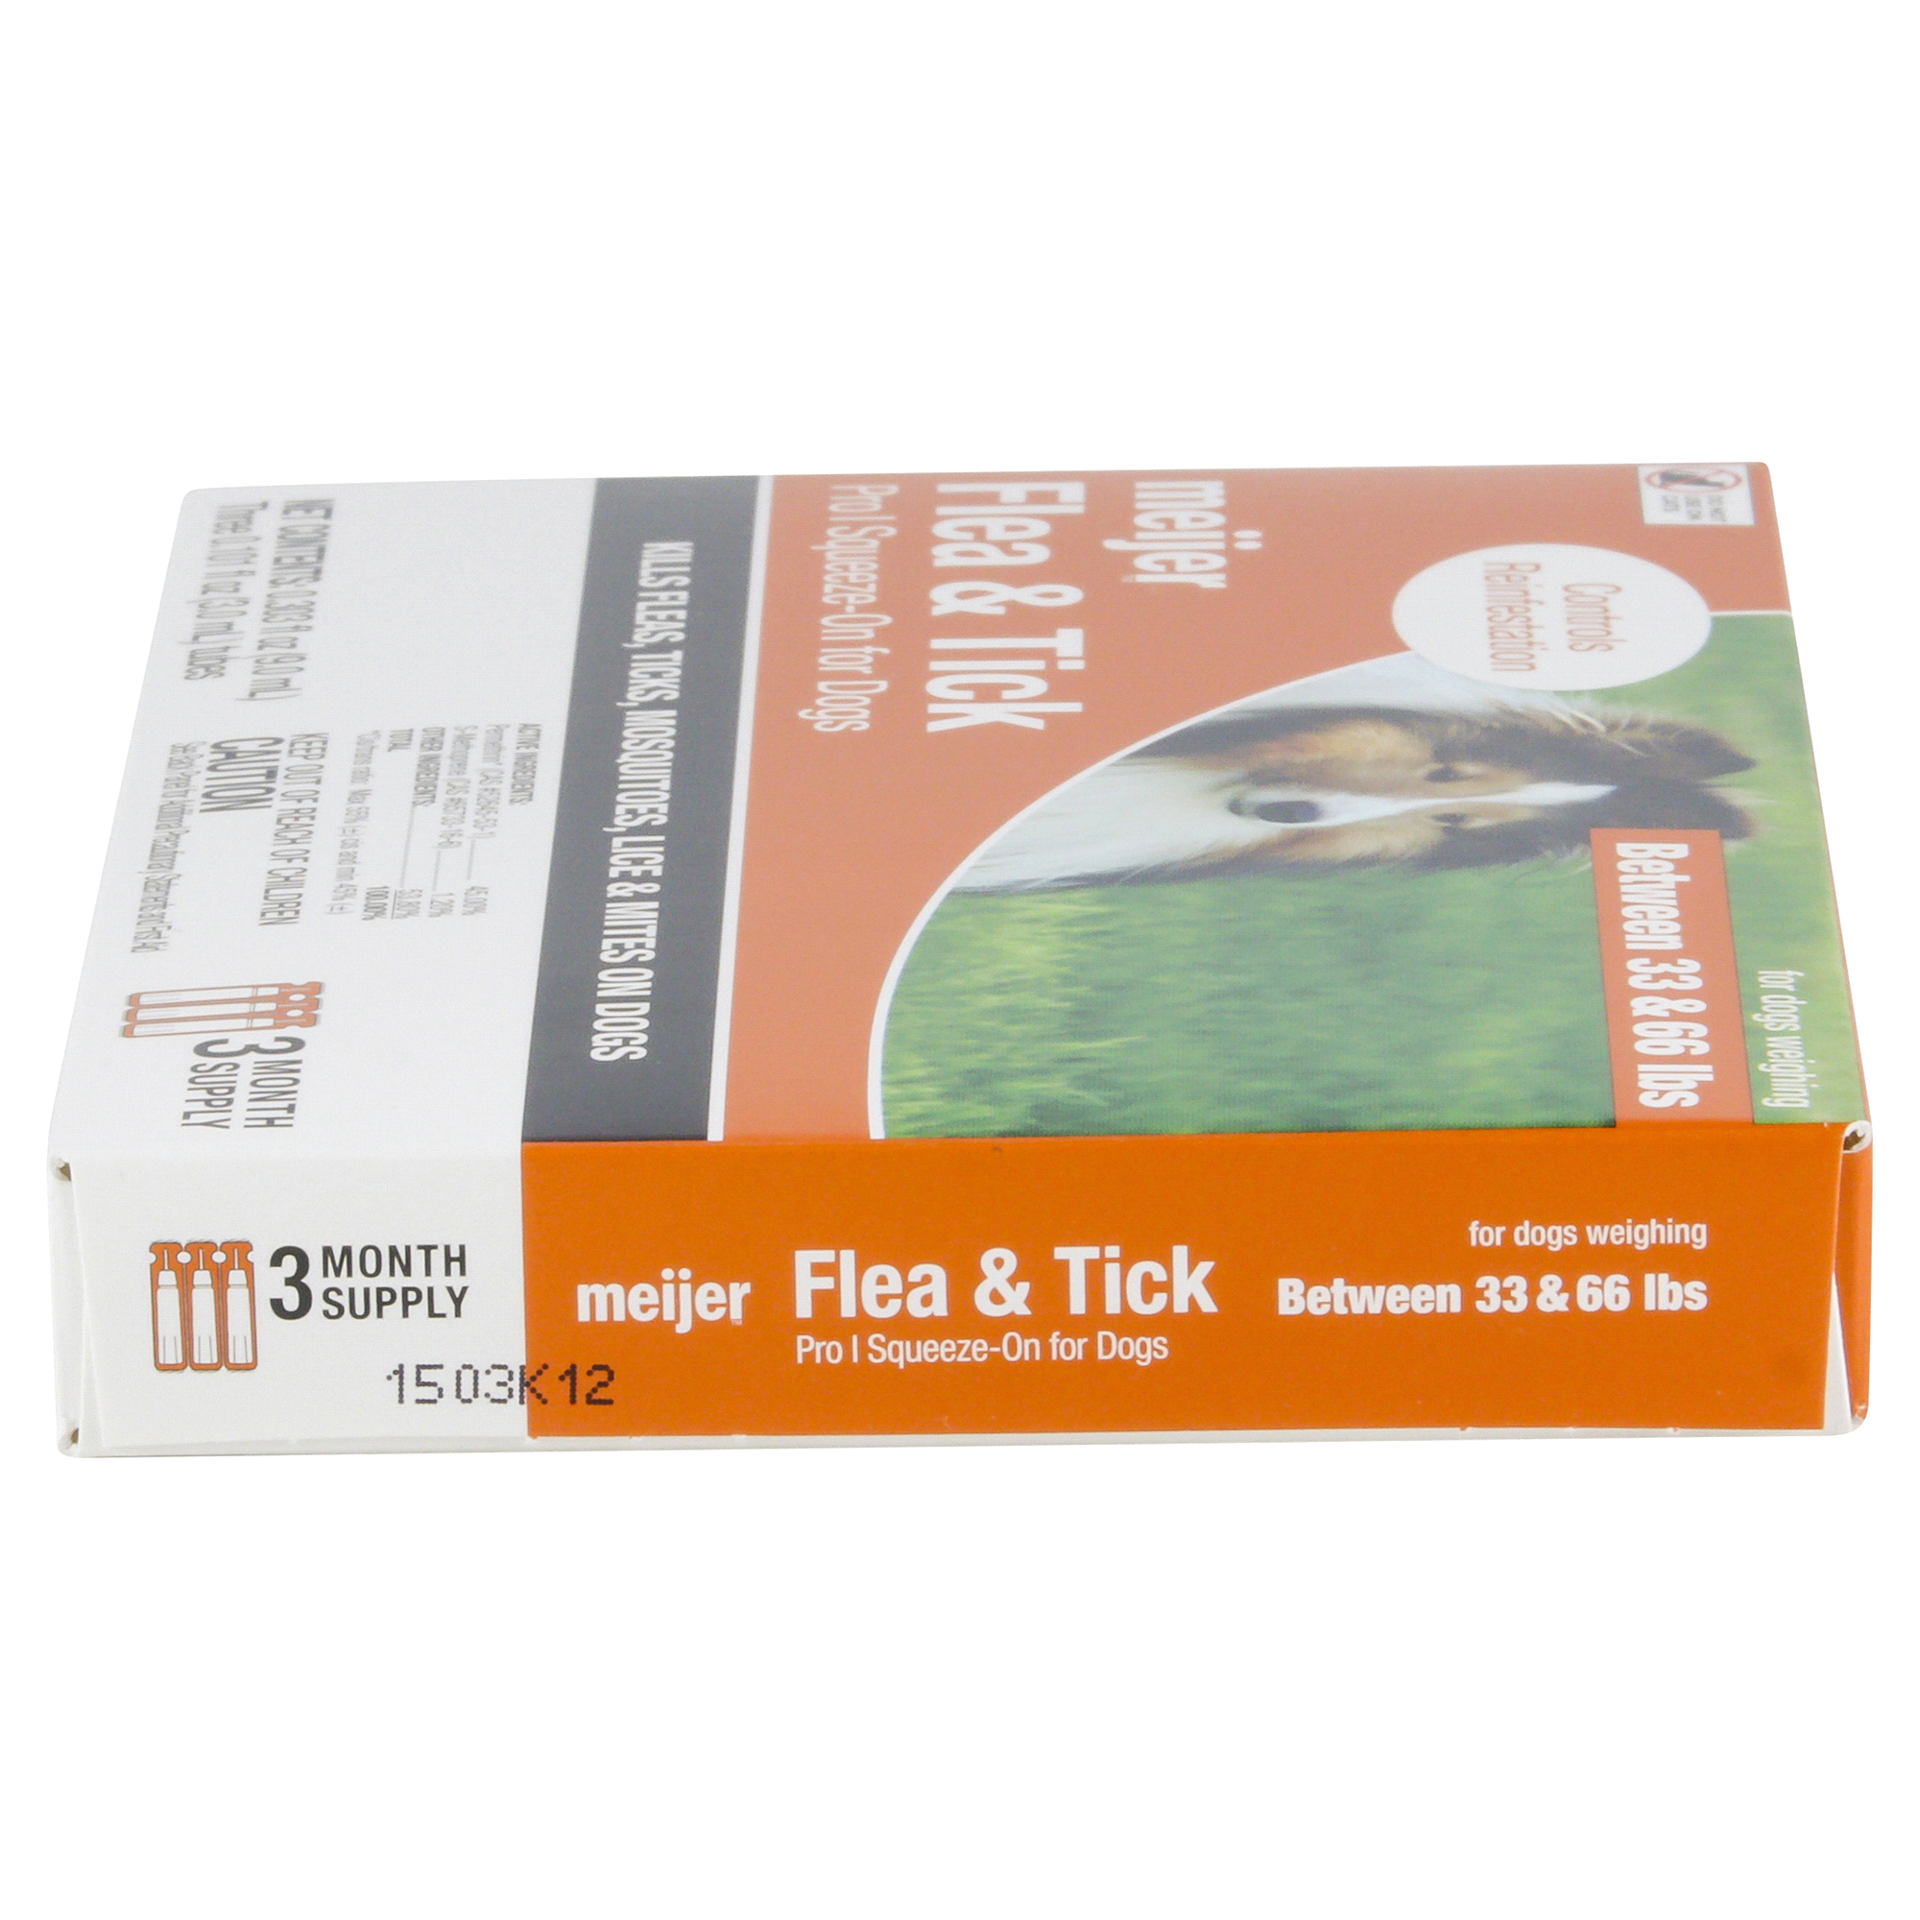 slide 5 of 21, Meijer Pro I Squeeze-On Flea & Tick for Dogs, 33 ct; 66 lb, 3 ct